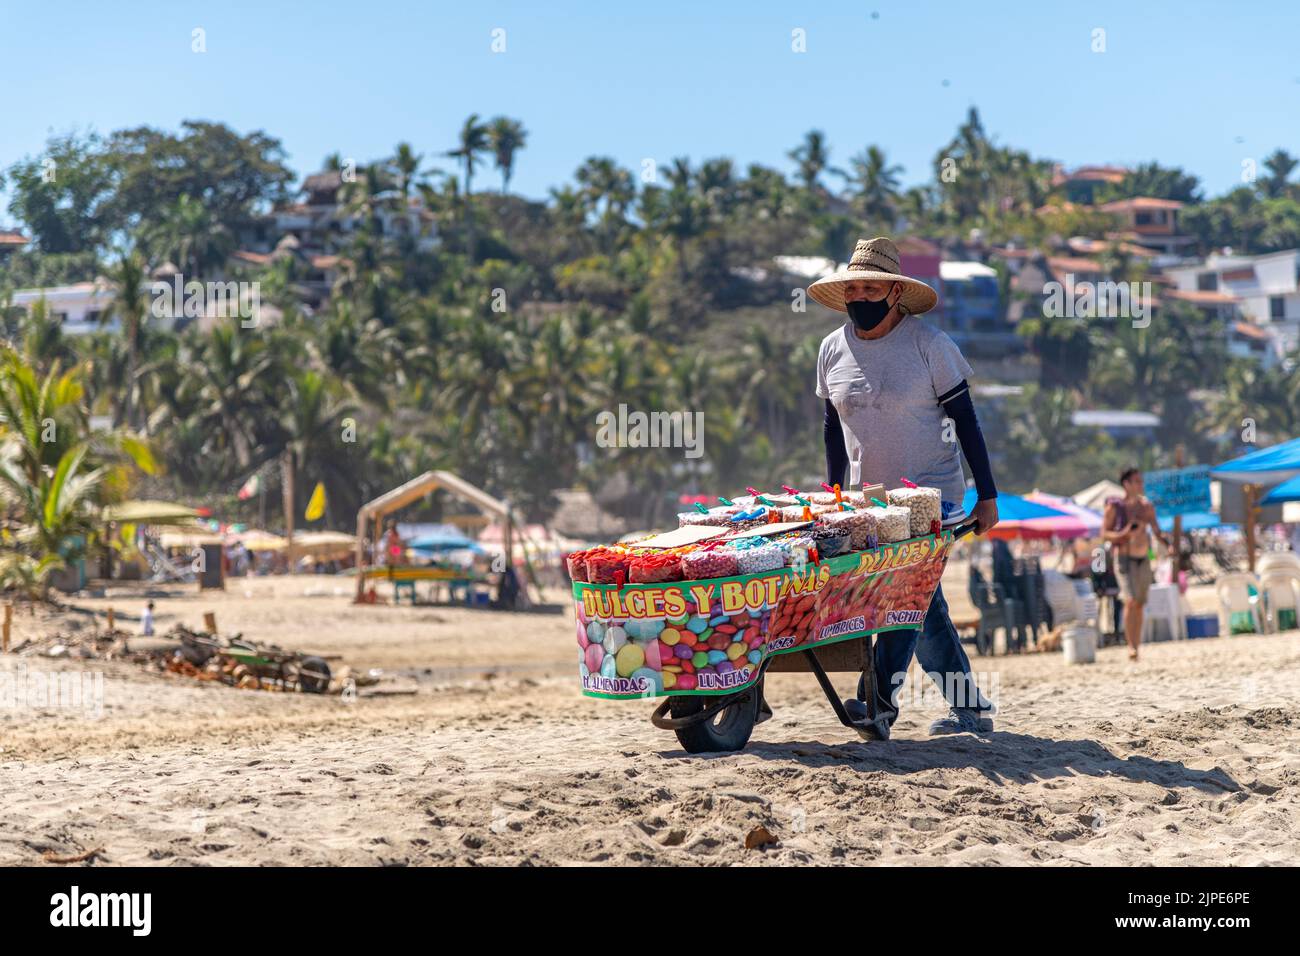 A man pushing a cart selling sweets and snacks on a beach in Sayulita, Mexico Stock Photo